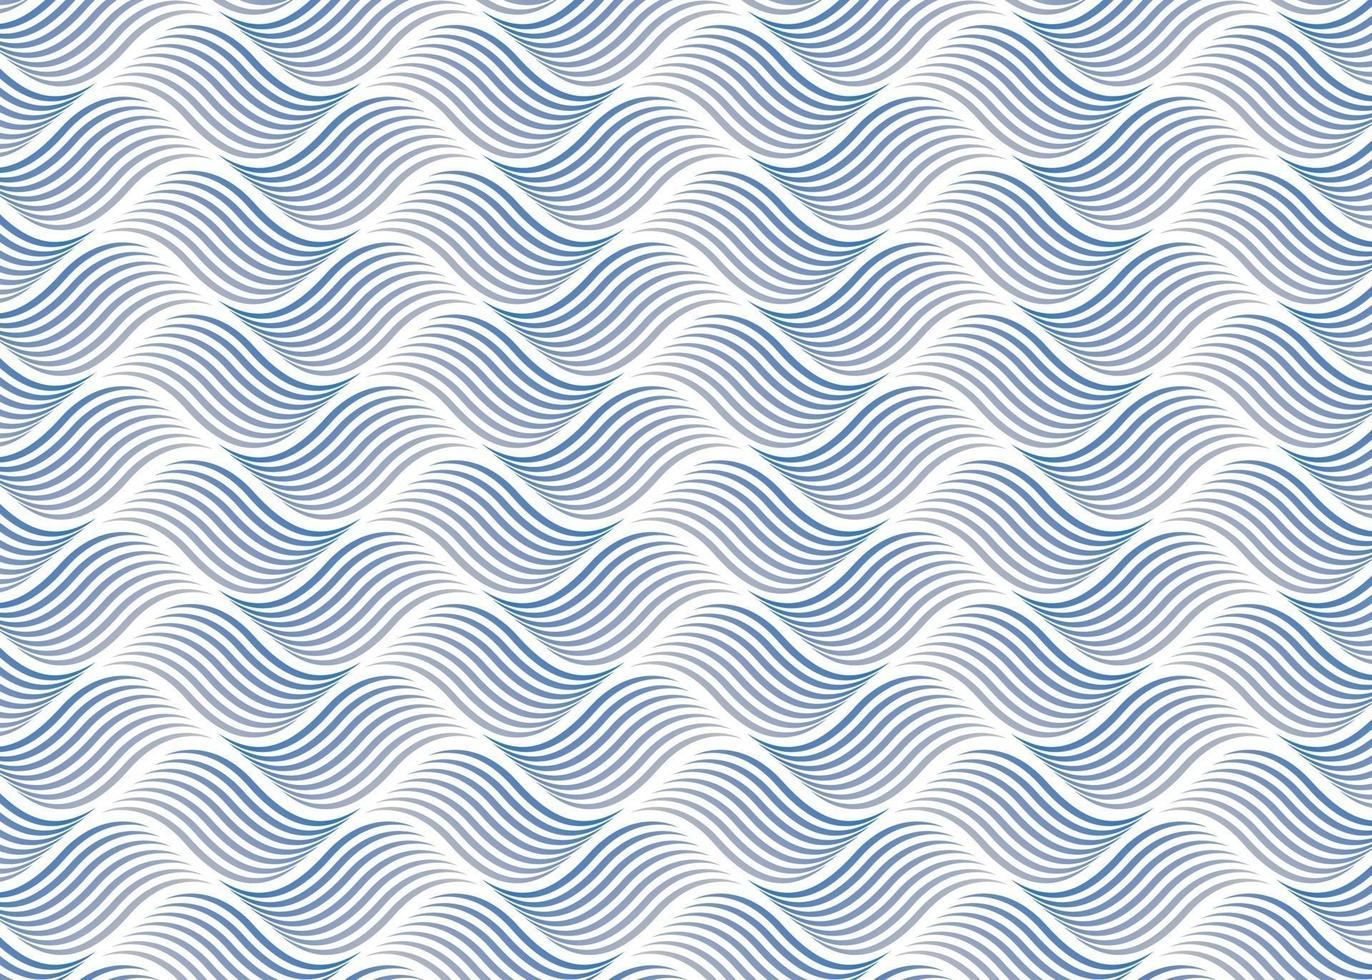 Seamless abstract wave pattern vector